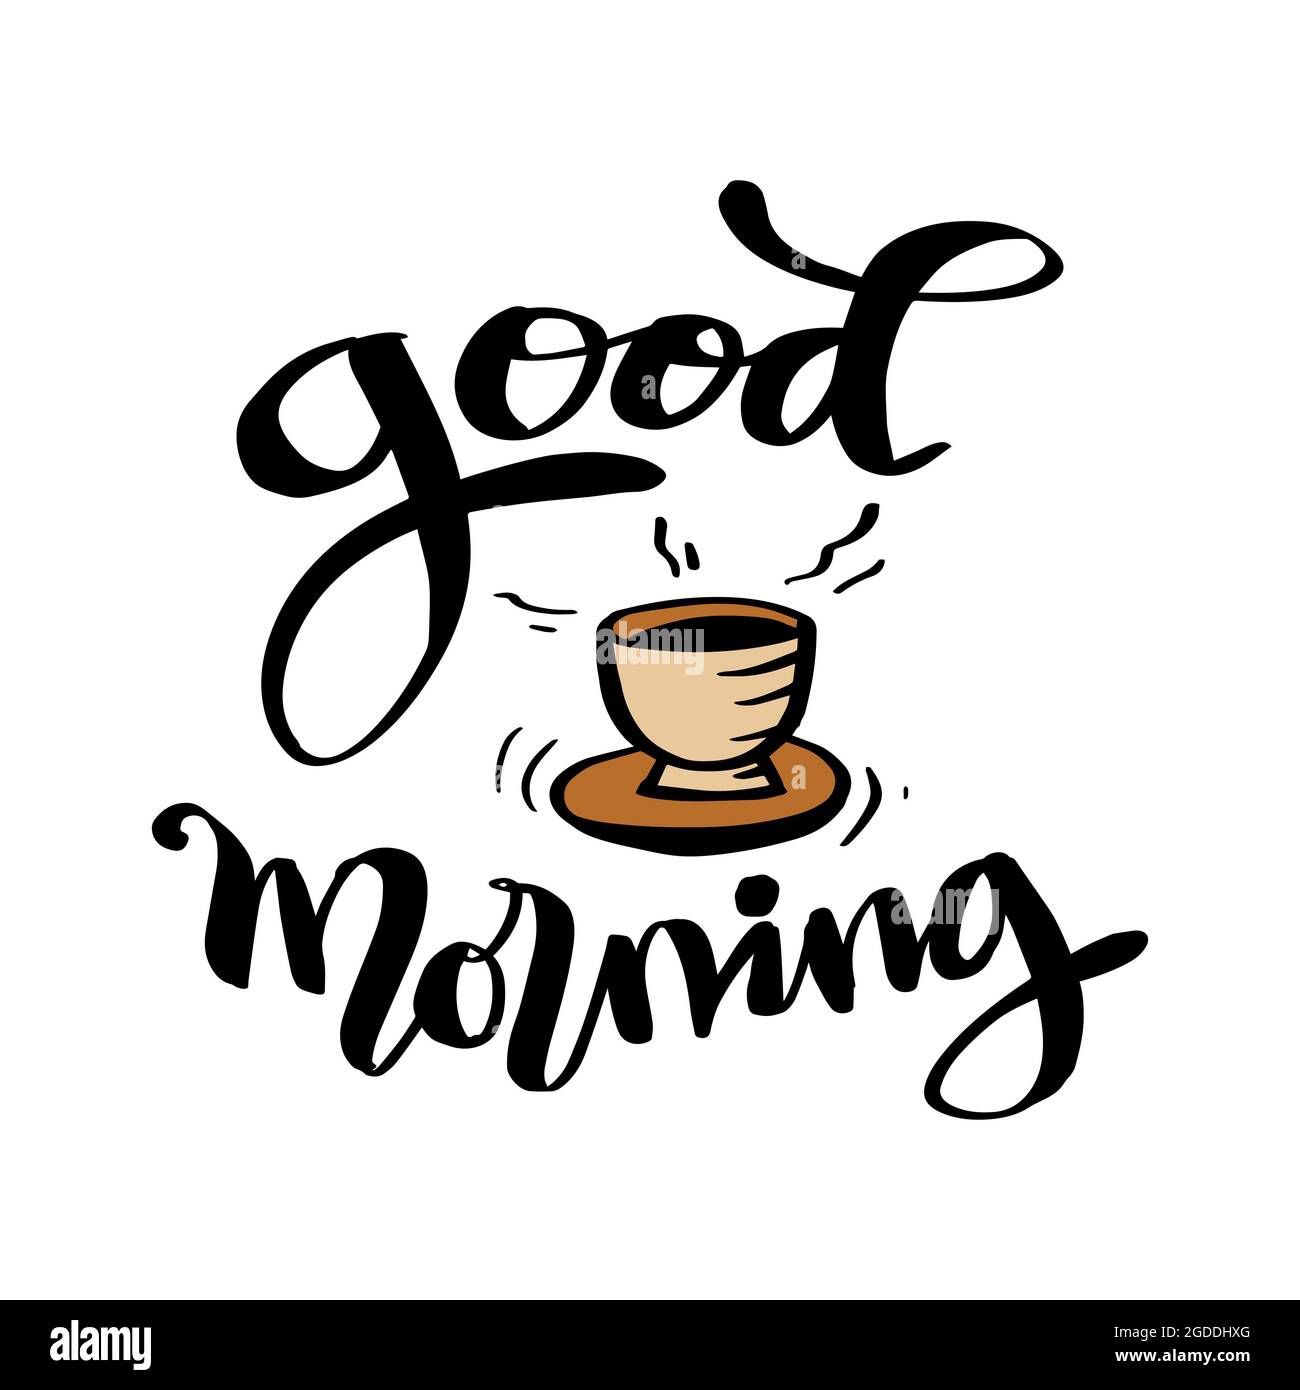 Good Morning lettering. Greeting card concept Stock Photo - Alamy